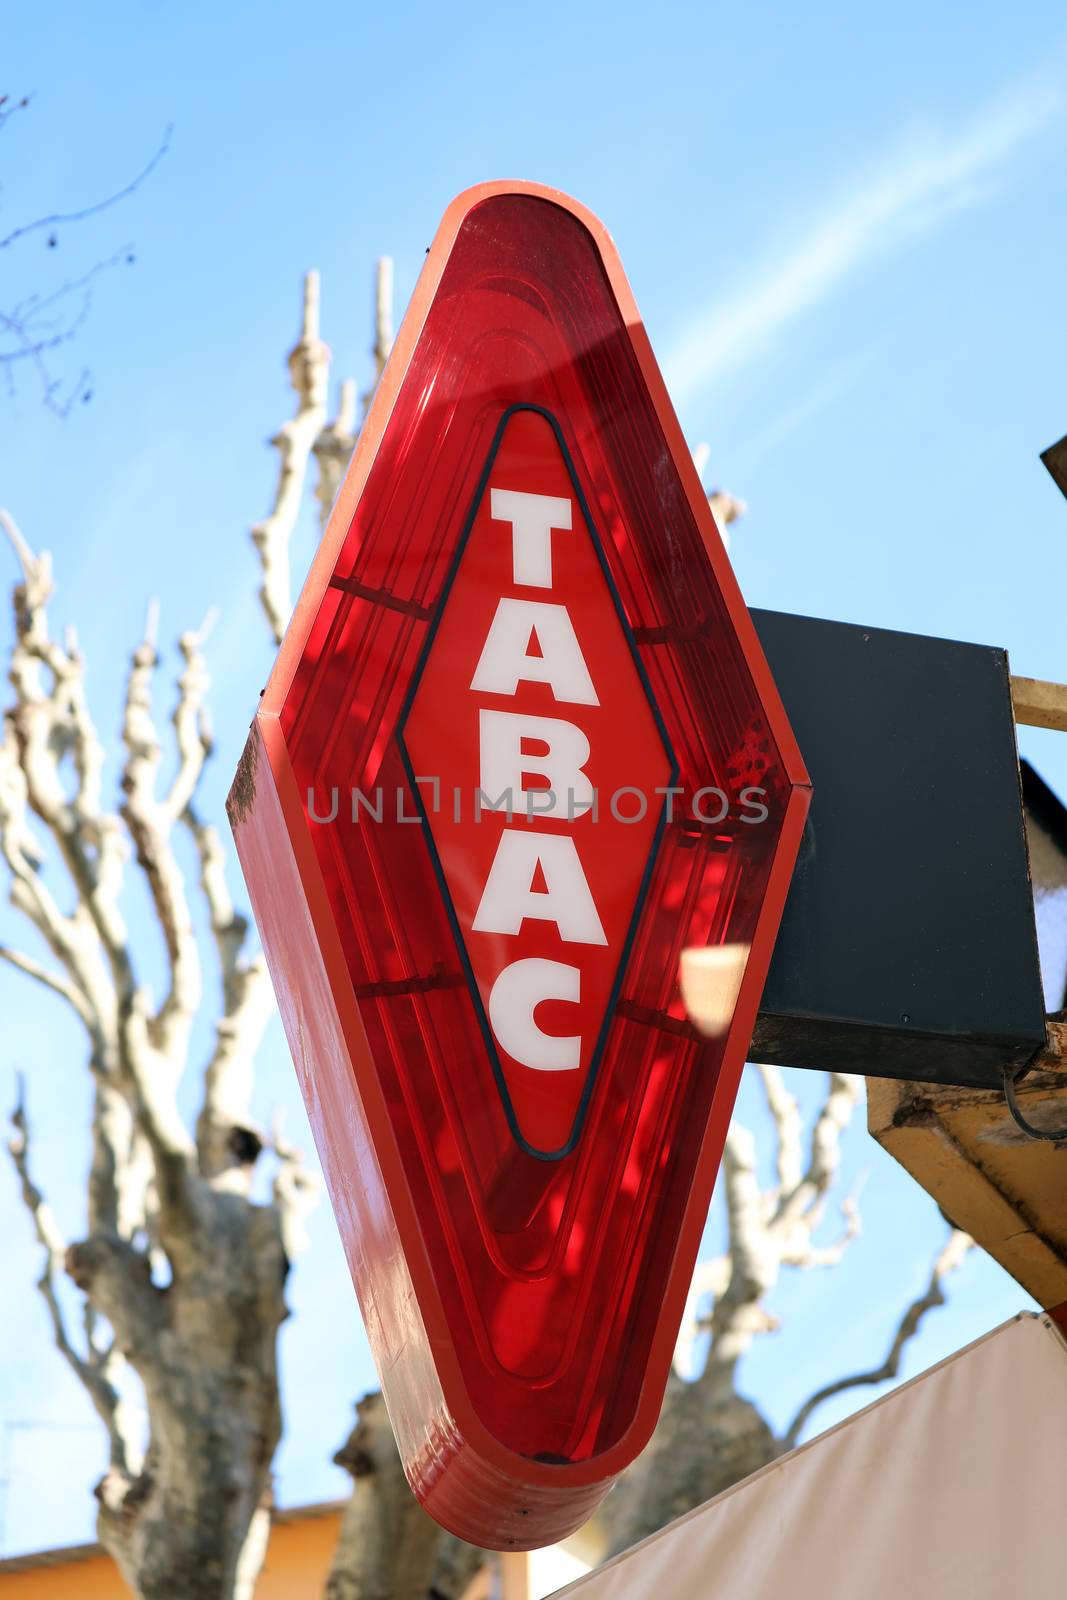 French Red And White Sign Tabac. In France "Tabac" Means Tobacco